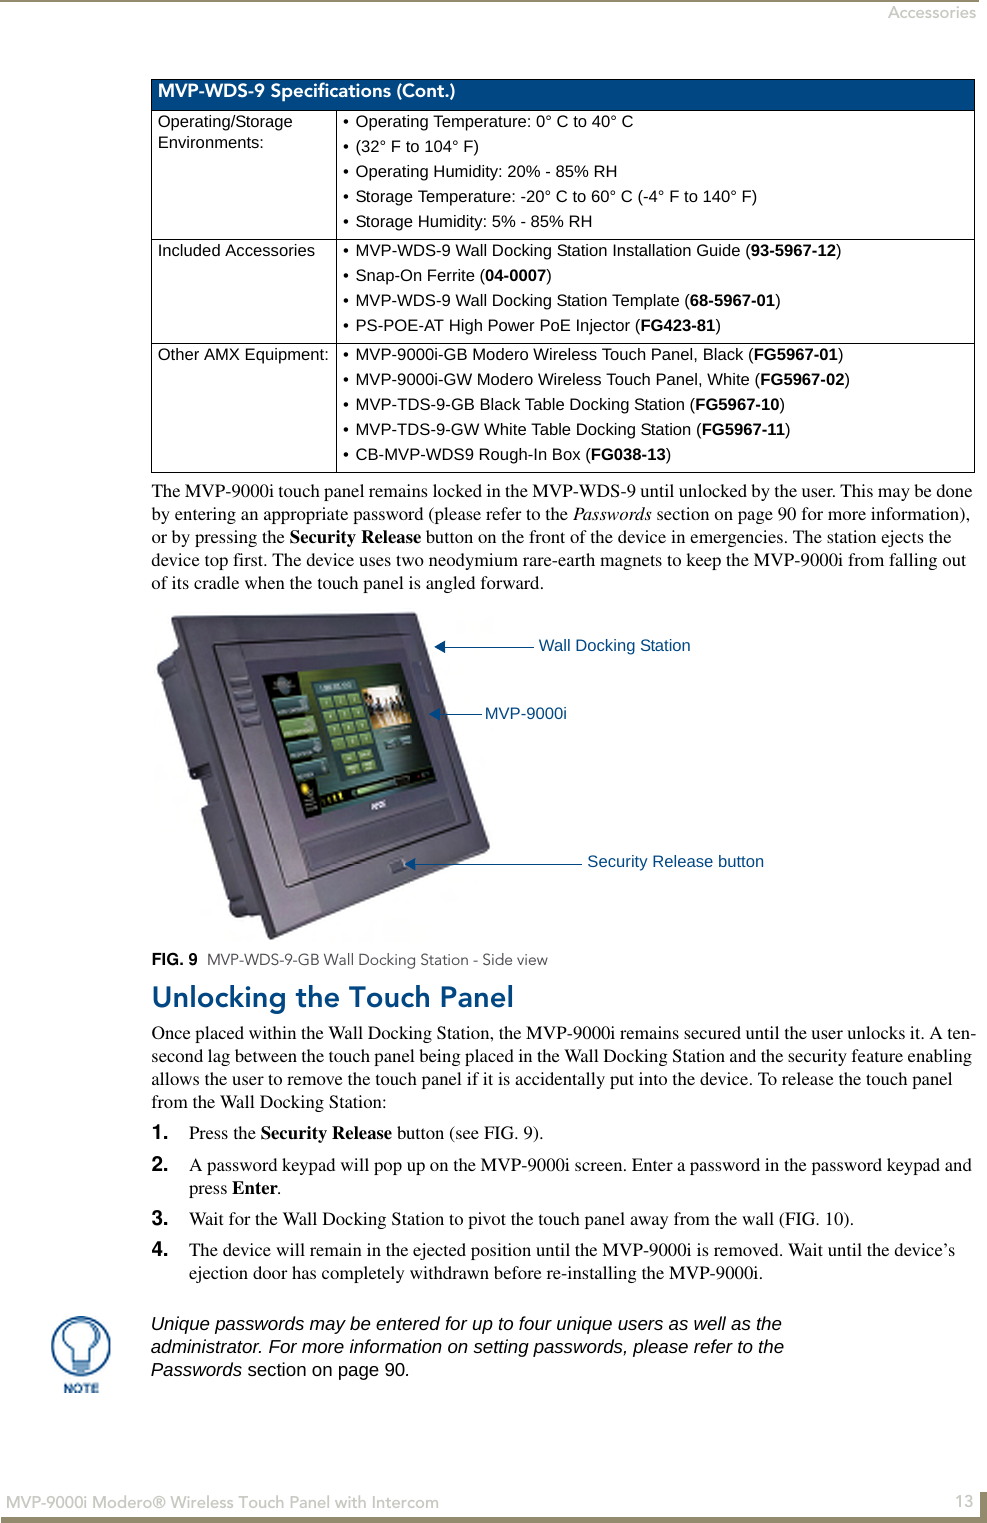 Accessories13MVP-9000i Modero® Wireless Touch Panel with IntercomThe MVP-9000i touch panel remains locked in the MVP-WDS-9 until unlocked by the user. This may be done by entering an appropriate password (please refer to the Passwords section on page 90 for more information), or by pressing the Security Release button on the front of the device in emergencies. The station ejects the device top first. The device uses two neodymium rare-earth magnets to keep the MVP-9000i from falling out of its cradle when the touch panel is angled forward.Unlocking the Touch PanelOnce placed within the Wall Docking Station, the MVP-9000i remains secured until the user unlocks it. A ten-second lag between the touch panel being placed in the Wall Docking Station and the security feature enabling allows the user to remove the touch panel if it is accidentally put into the device. To release the touch panel from the Wall Docking Station:1. Press the Security Release button (see FIG. 9).2. A password keypad will pop up on the MVP-9000i screen. Enter a password in the password keypad and press Enter.3. Wait for the Wall Docking Station to pivot the touch panel away from the wall (FIG. 10).4. The device will remain in the ejected position until the MVP-9000i is removed. Wait until the device’s ejection door has completely withdrawn before re-installing the MVP-9000i.MVP-WDS-9 Specifications (Cont.)Operating/StorageEnvironments:• Operating Temperature: 0° C to 40° C • (32° F to 104° F)• Operating Humidity: 20% - 85% RH• Storage Temperature: -20° C to 60° C (-4° F to 140° F)• Storage Humidity: 5% - 85% RHIncluded Accessories • MVP-WDS-9 Wall Docking Station Installation Guide (93-5967-12)• Snap-On Ferrite (04-0007)• MVP-WDS-9 Wall Docking Station Template (68-5967-01)• PS-POE-AT High Power PoE Injector (FG423-81)Other AMX Equipment: • MVP-9000i-GB Modero Wireless Touch Panel, Black (FG5967-01)• MVP-9000i-GW Modero Wireless Touch Panel, White (FG5967-02)• MVP-TDS-9-GB Black Table Docking Station (FG5967-10)• MVP-TDS-9-GW White Table Docking Station (FG5967-11)• CB-MVP-WDS9 Rough-In Box (FG038-13)FIG. 9  MVP-WDS-9-GB Wall Docking Station - Side viewMVP-9000iWall Docking StationSecurity Release buttonUnique passwords may be entered for up to four unique users as well as the administrator. For more information on setting passwords, please refer to the Passwords section on page 90.